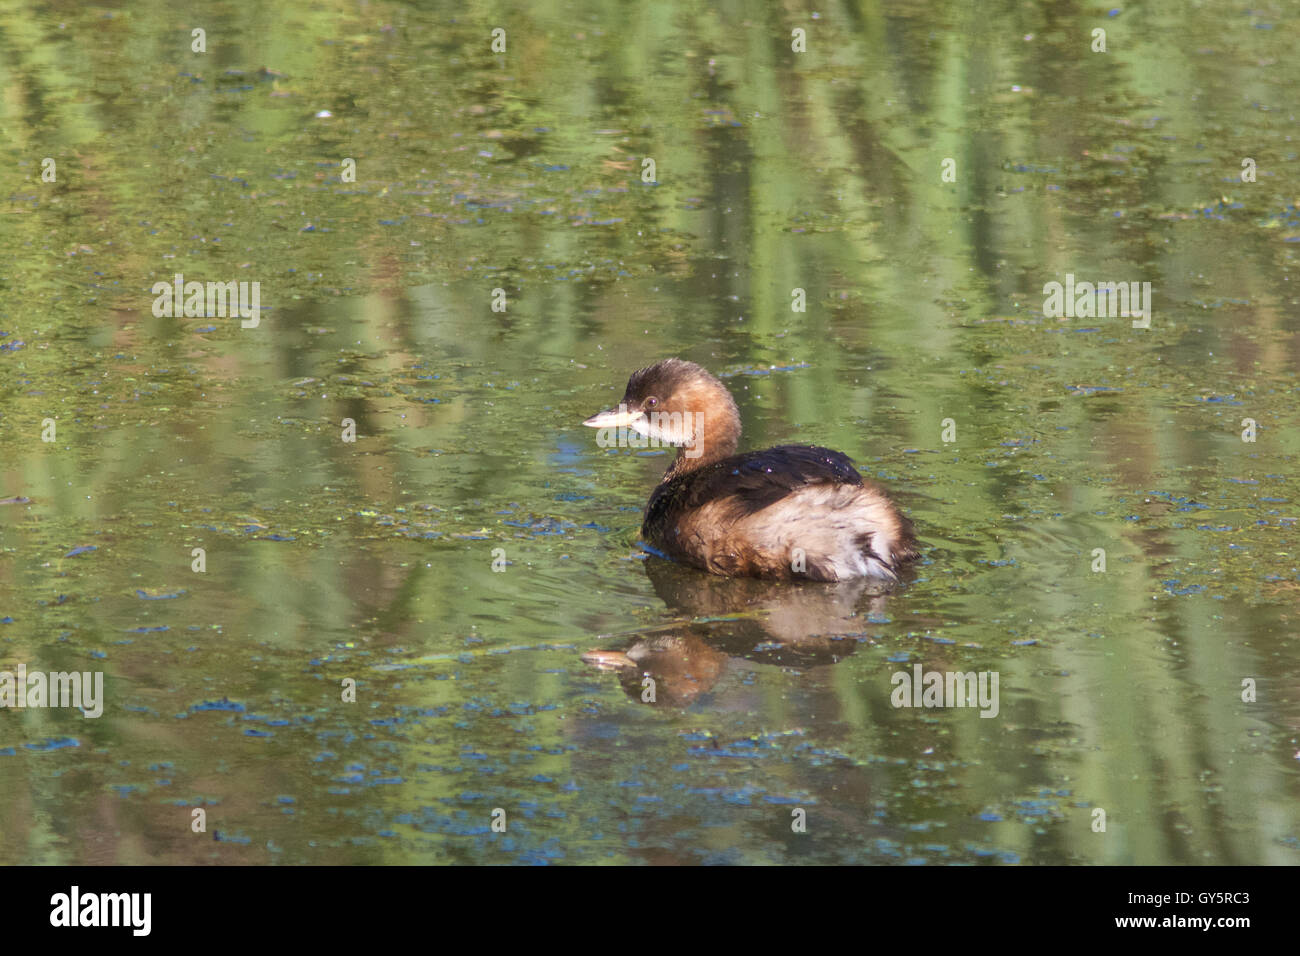 A Little Grebe (Tachybaptus ruficollis) or Dabchick water bird swimming around on a pond on a sunny day. Stock Photo